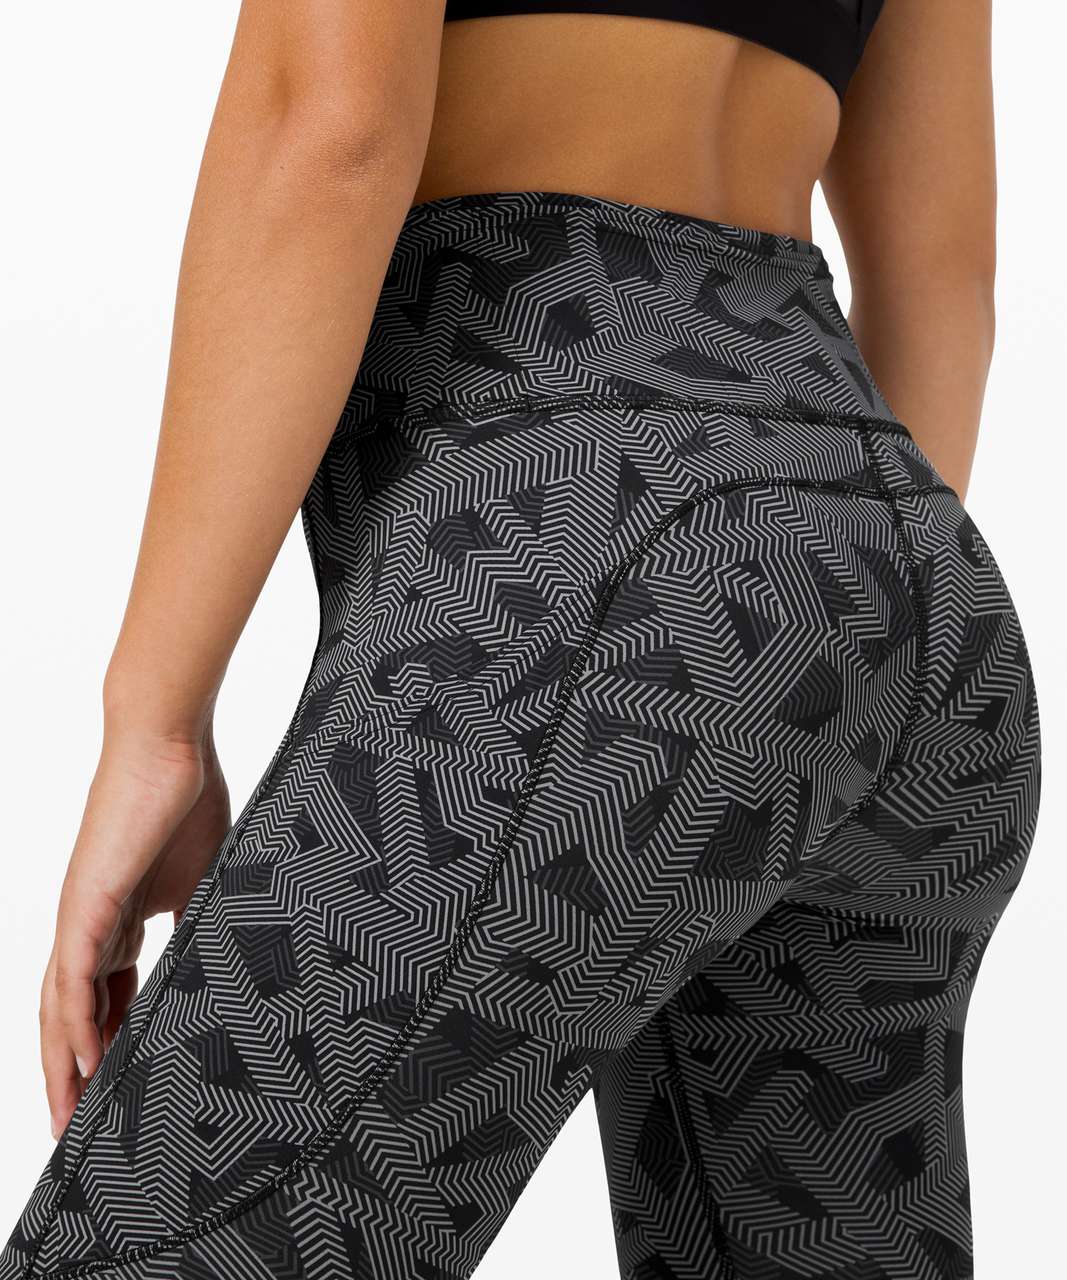 Lululemon Fast and Free Tight II 25" *Non-Reflective Nulux - Textured Labyrinth Black Light Cast